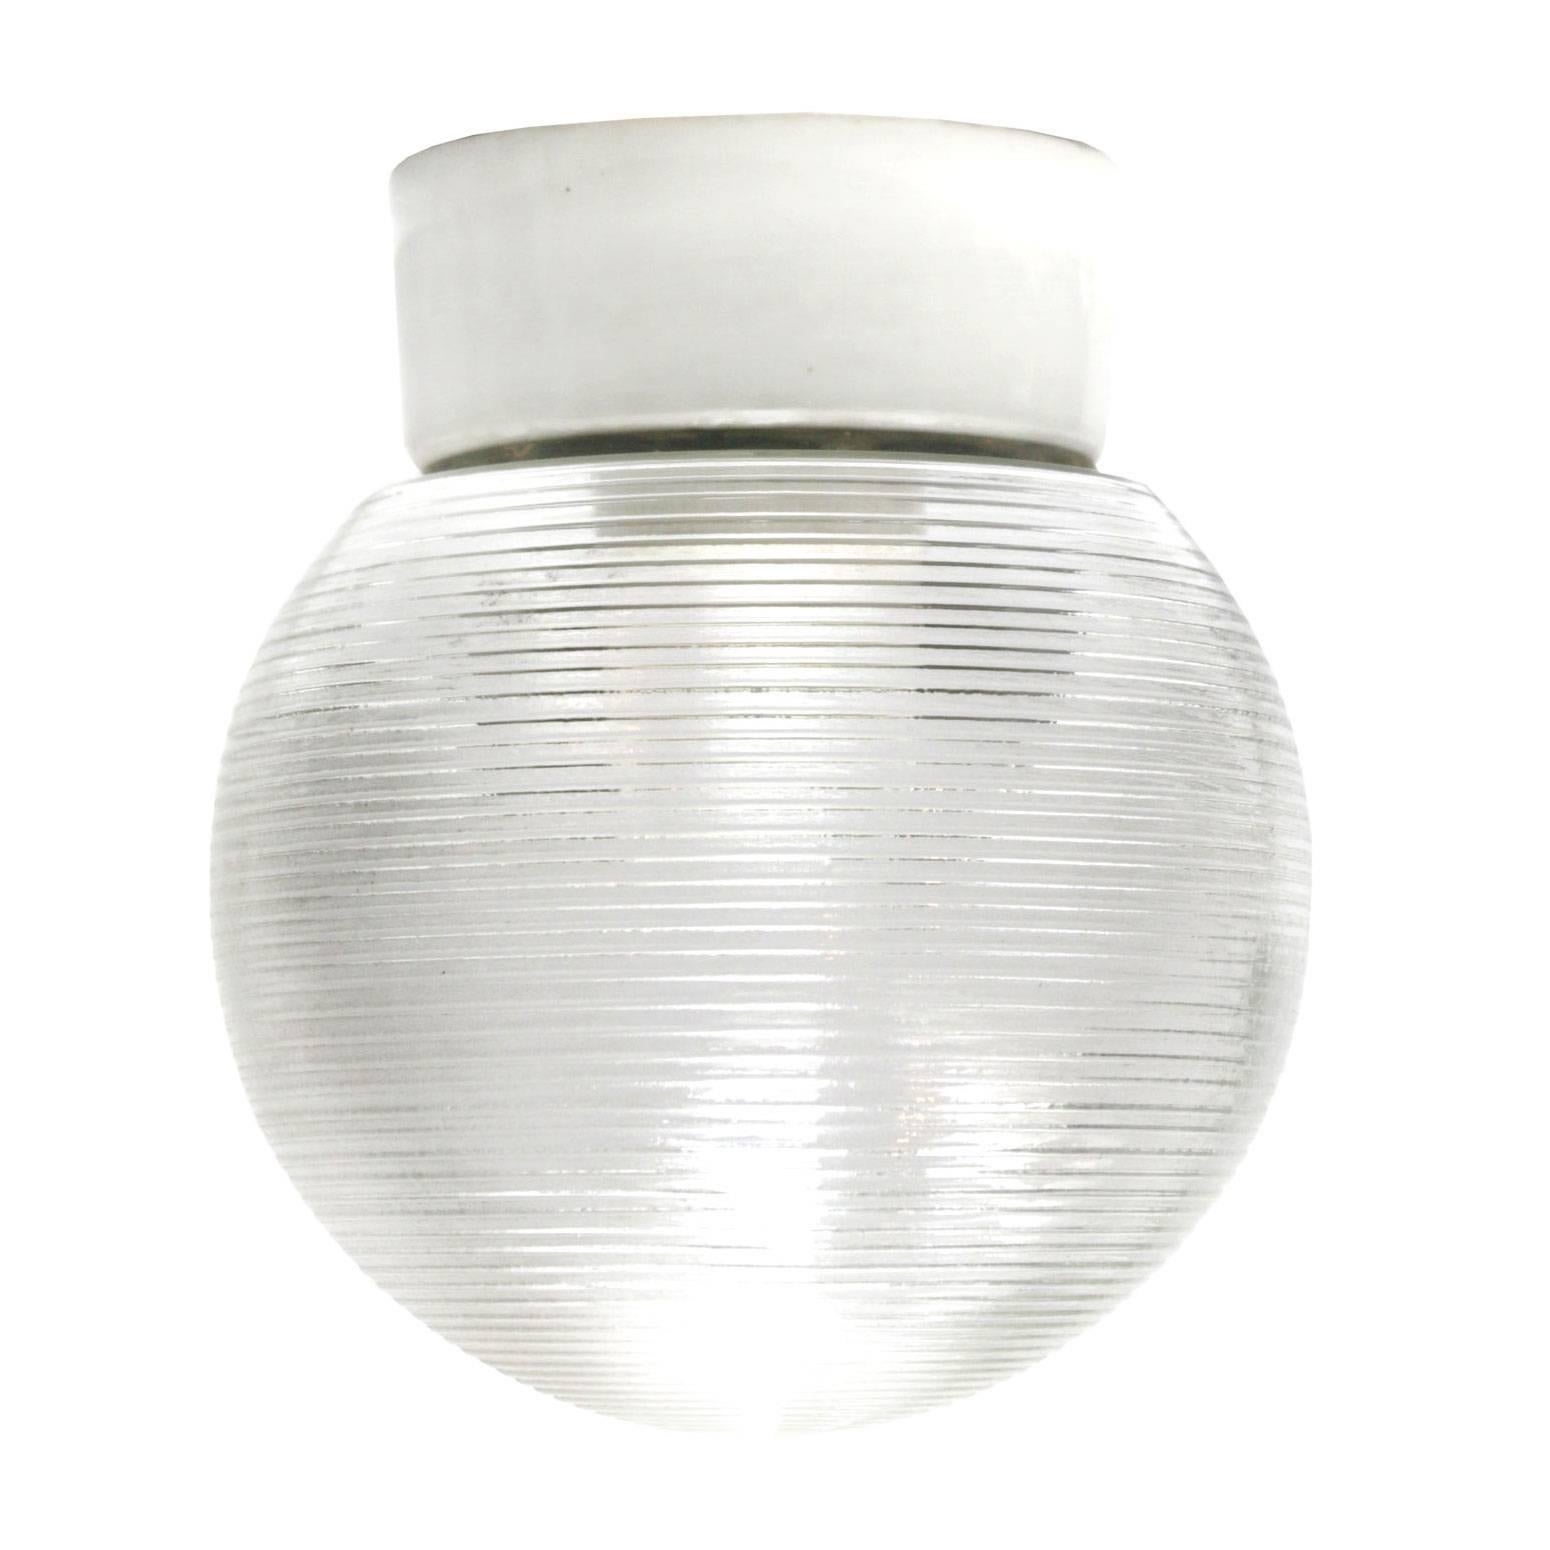 Industrial ceiling lamp. White porcelain. Striped glass.
Two conductors. No ground.

Weight: 1.5 kg / 3.3 lb

Priced individual item. All lamps have been made suitable by international standards for incandescent light bulbs, energy-efficient